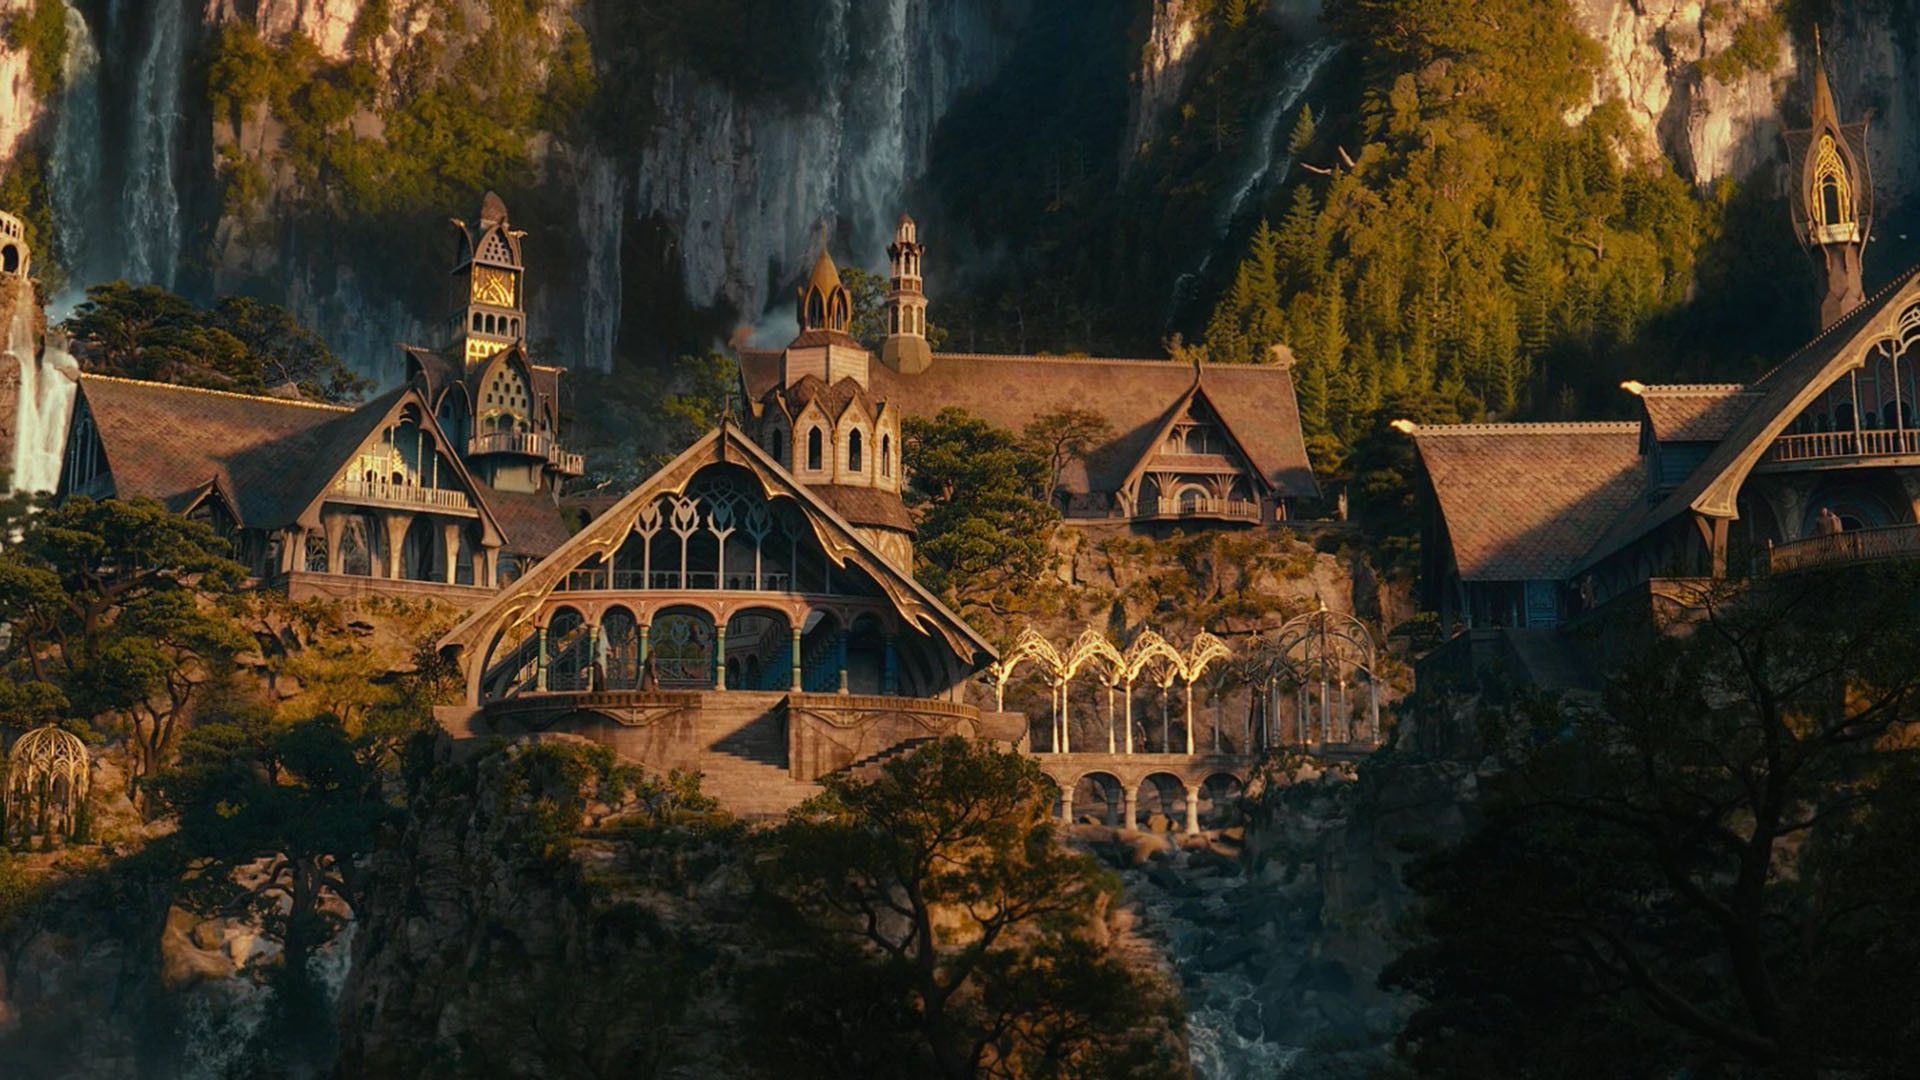 Free download rivendell the lord of the rings movie HD wallpaper 1920x1080 7246jpg [1920x1080] for your Desktop, Mobile & Tablet. Explore Wallpaper Lord Of The Rings. The Lord Of